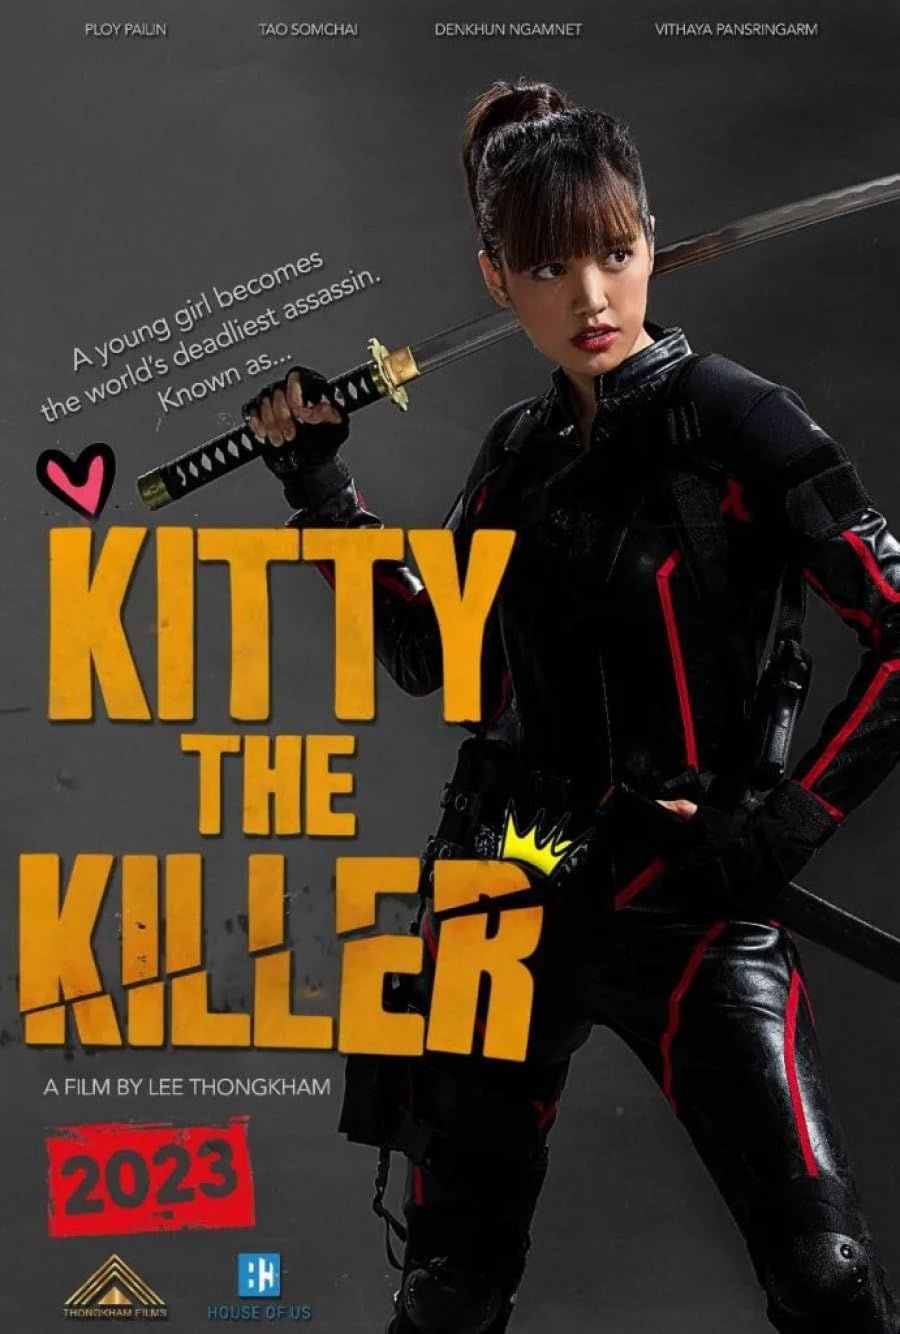 Kitty the Killer 2023 (Voice Over) Dubbed WEBRip Full Movie 720p 480p Movie download